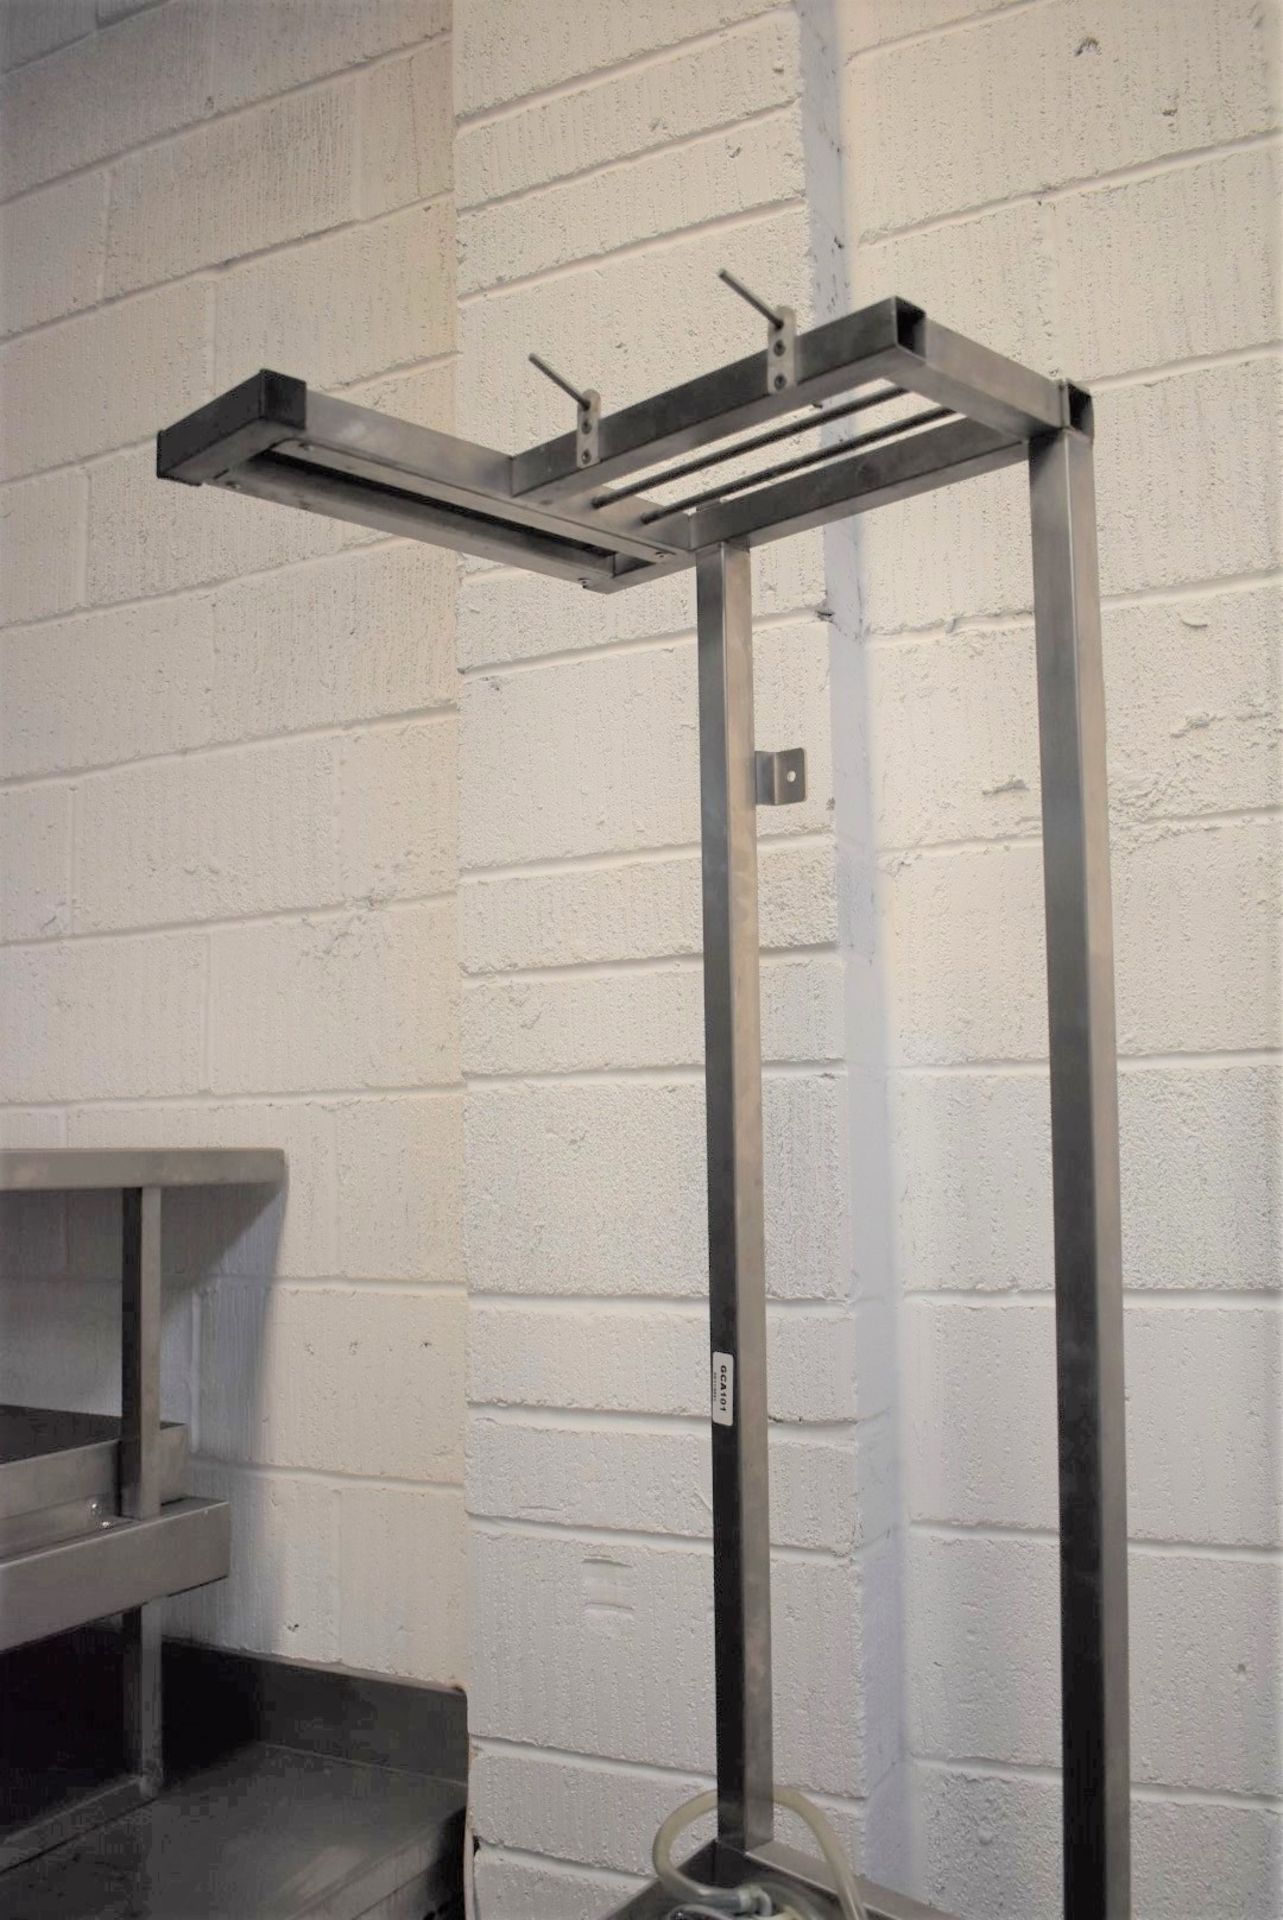 1 x Stainless Steel Commercial Kitchen Janitorial Mop / Cleaning Station - Dimensions: H187 x W33 - Image 5 of 8